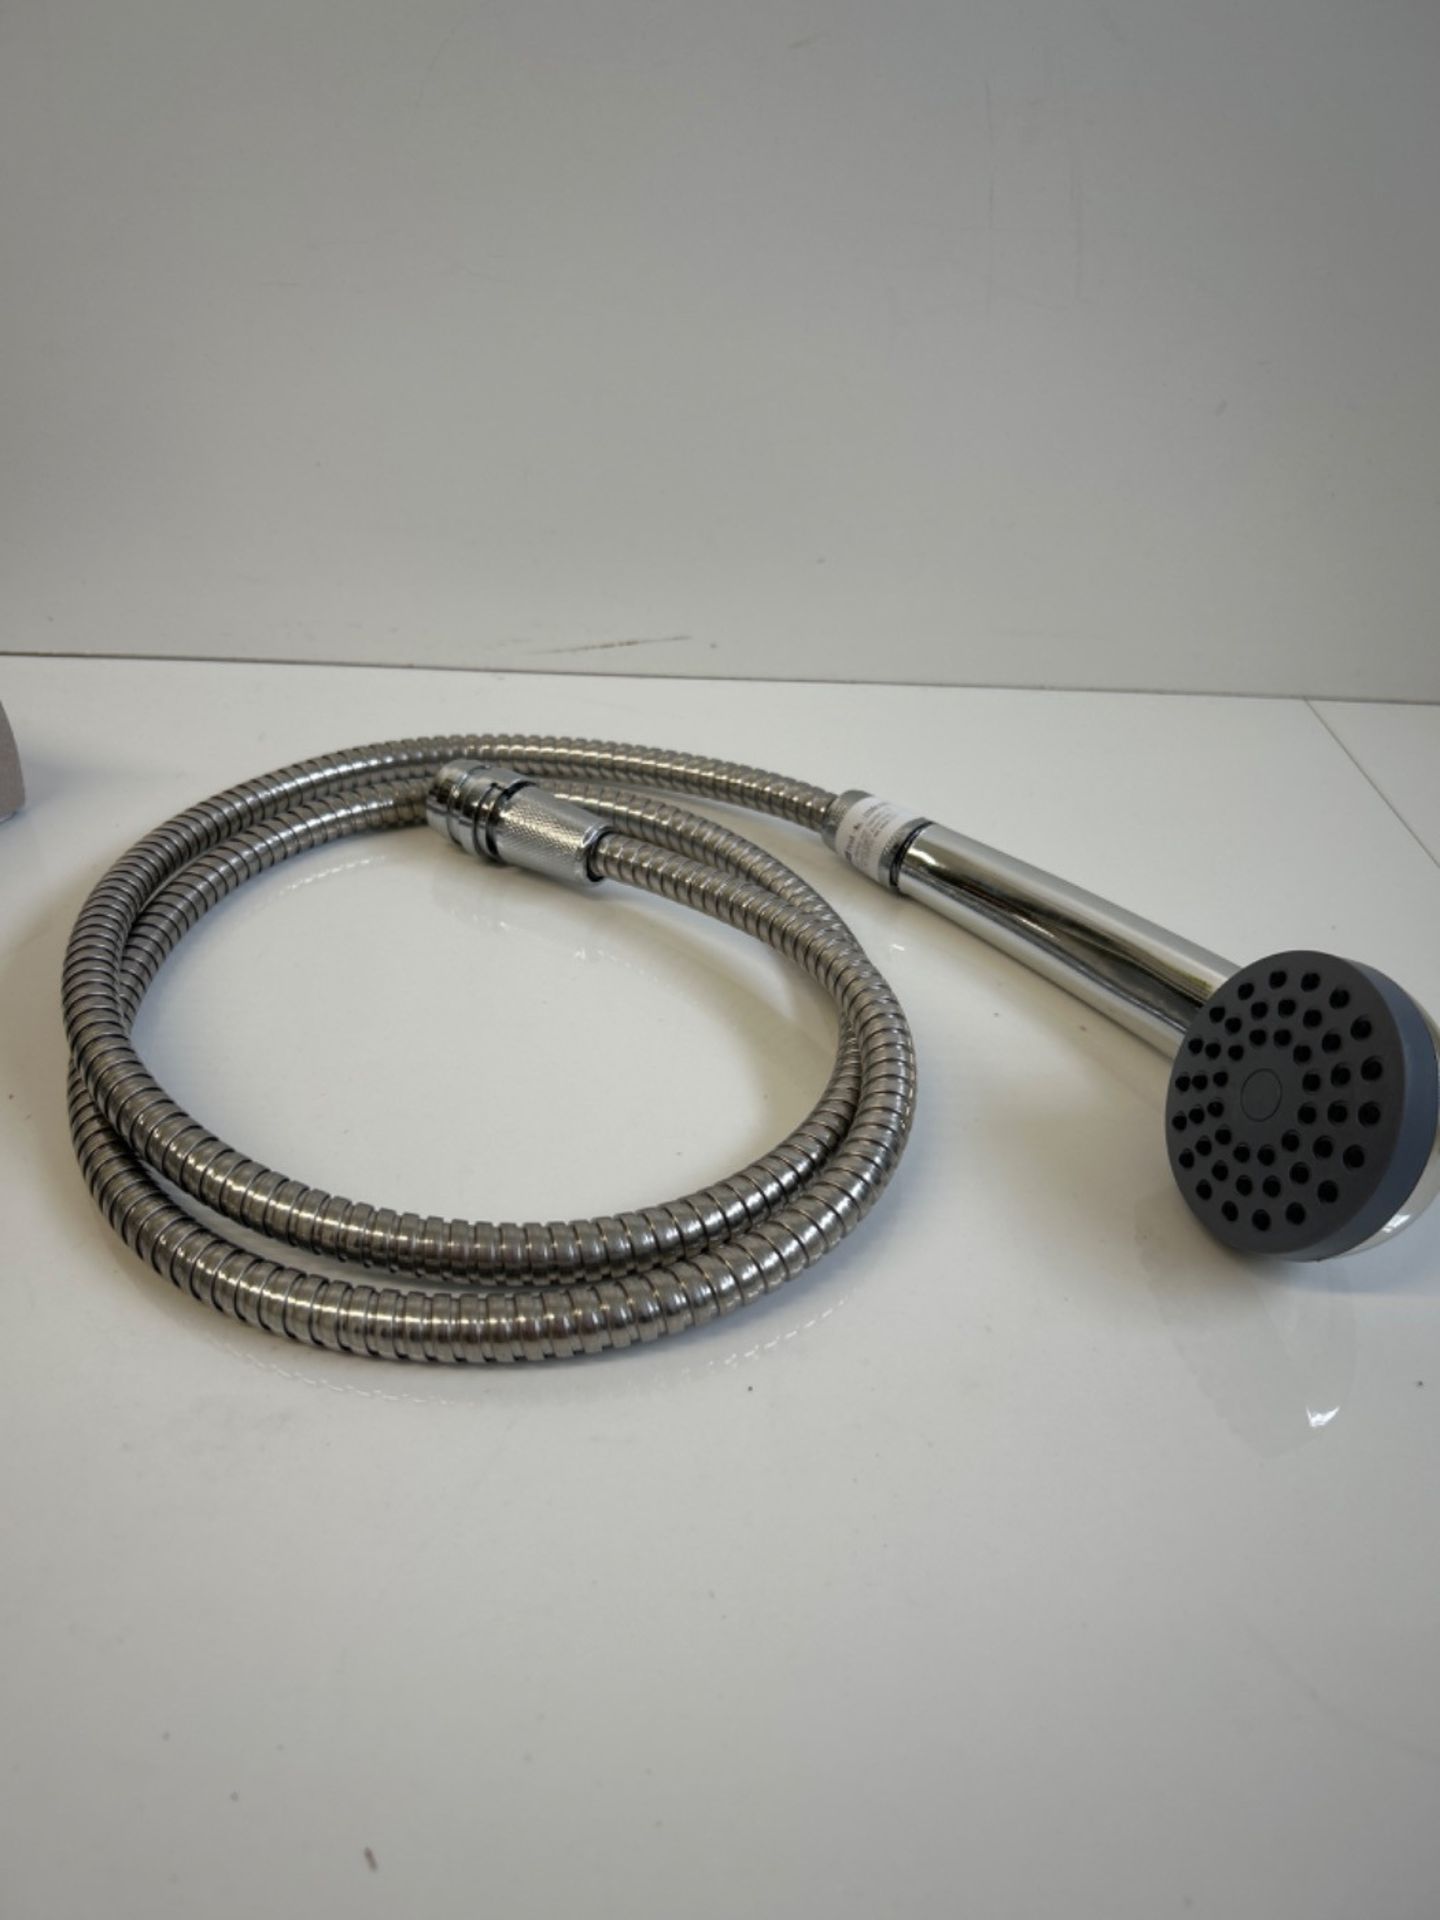 Wenko WK22866 Handbasin-Mobile Hand Stainless Steel Shower Hose, Silver Shiny, 6.5 X 150 X 3.5 Cm - Image 3 of 3